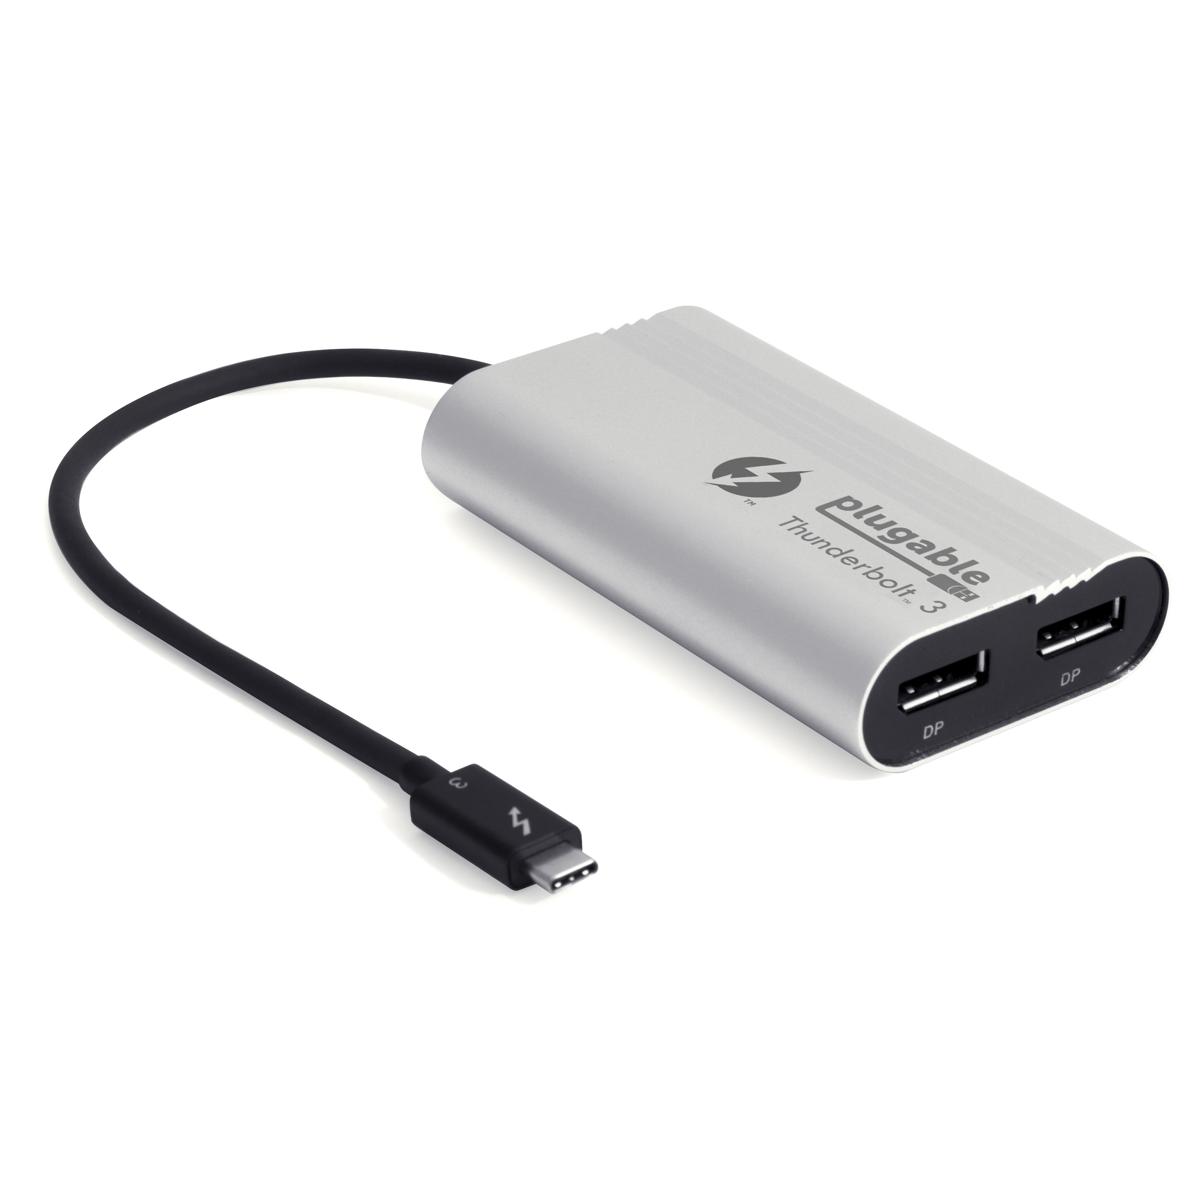 Download Anydata Wireless Ethernet Adapter Driver